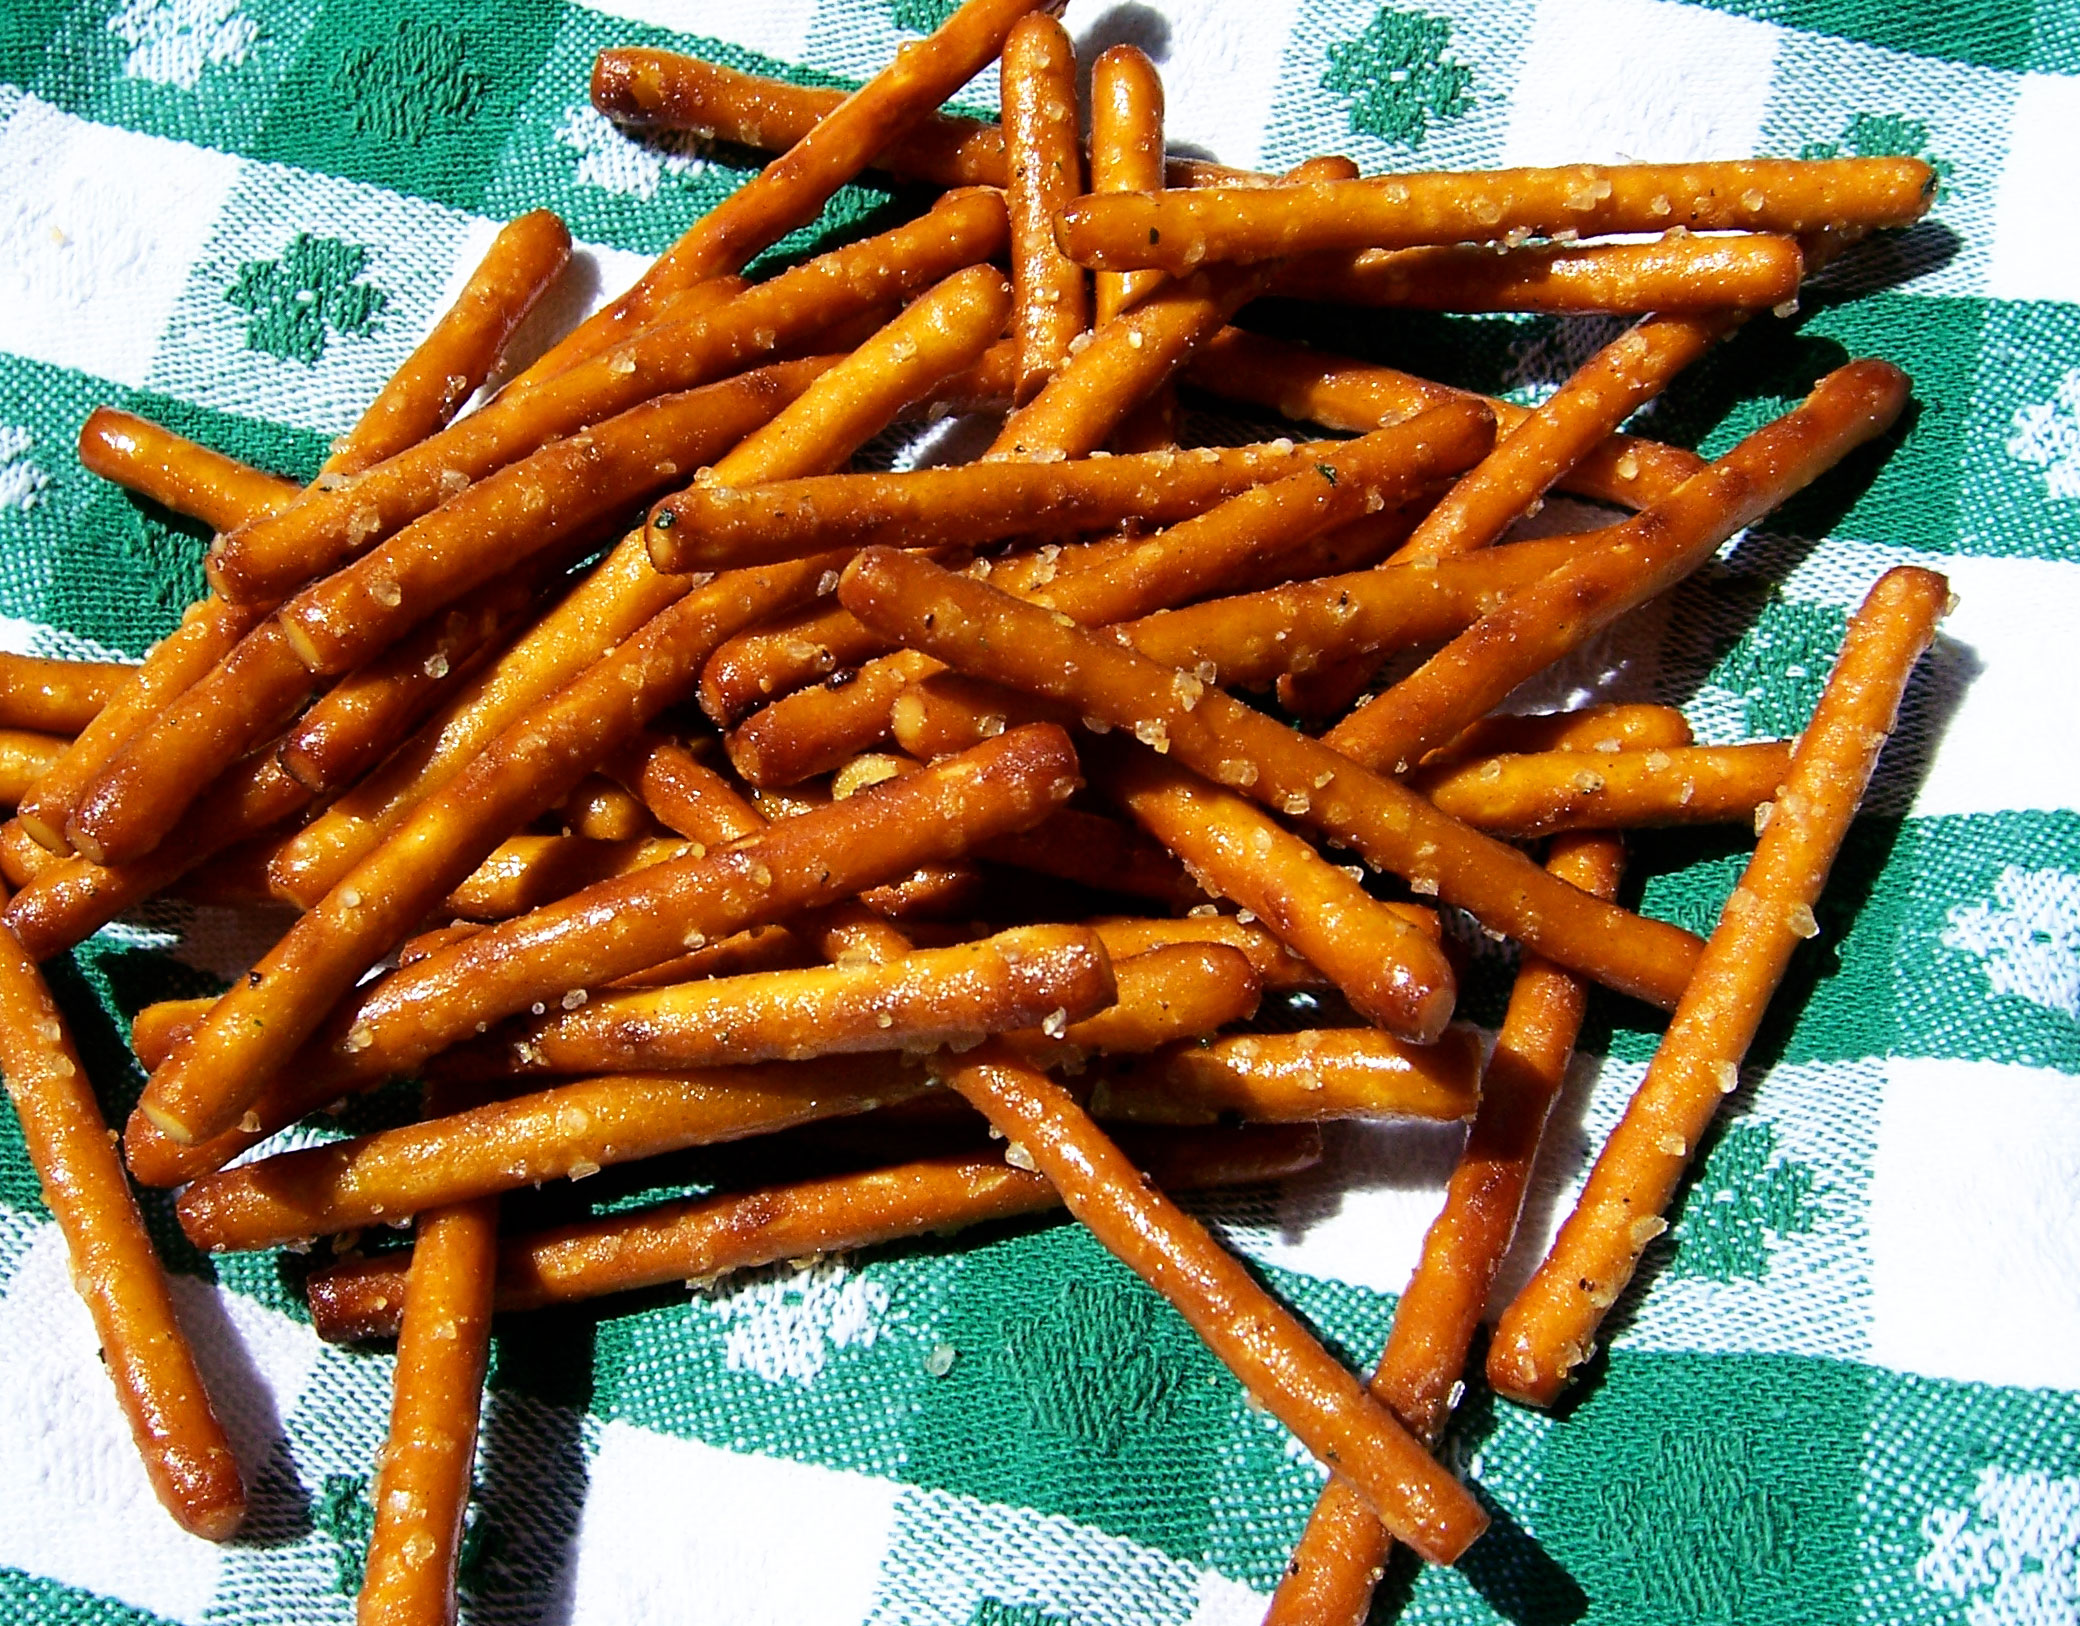 pretzel-stick-with-dip-sbcanning-homemade-canning-recipes